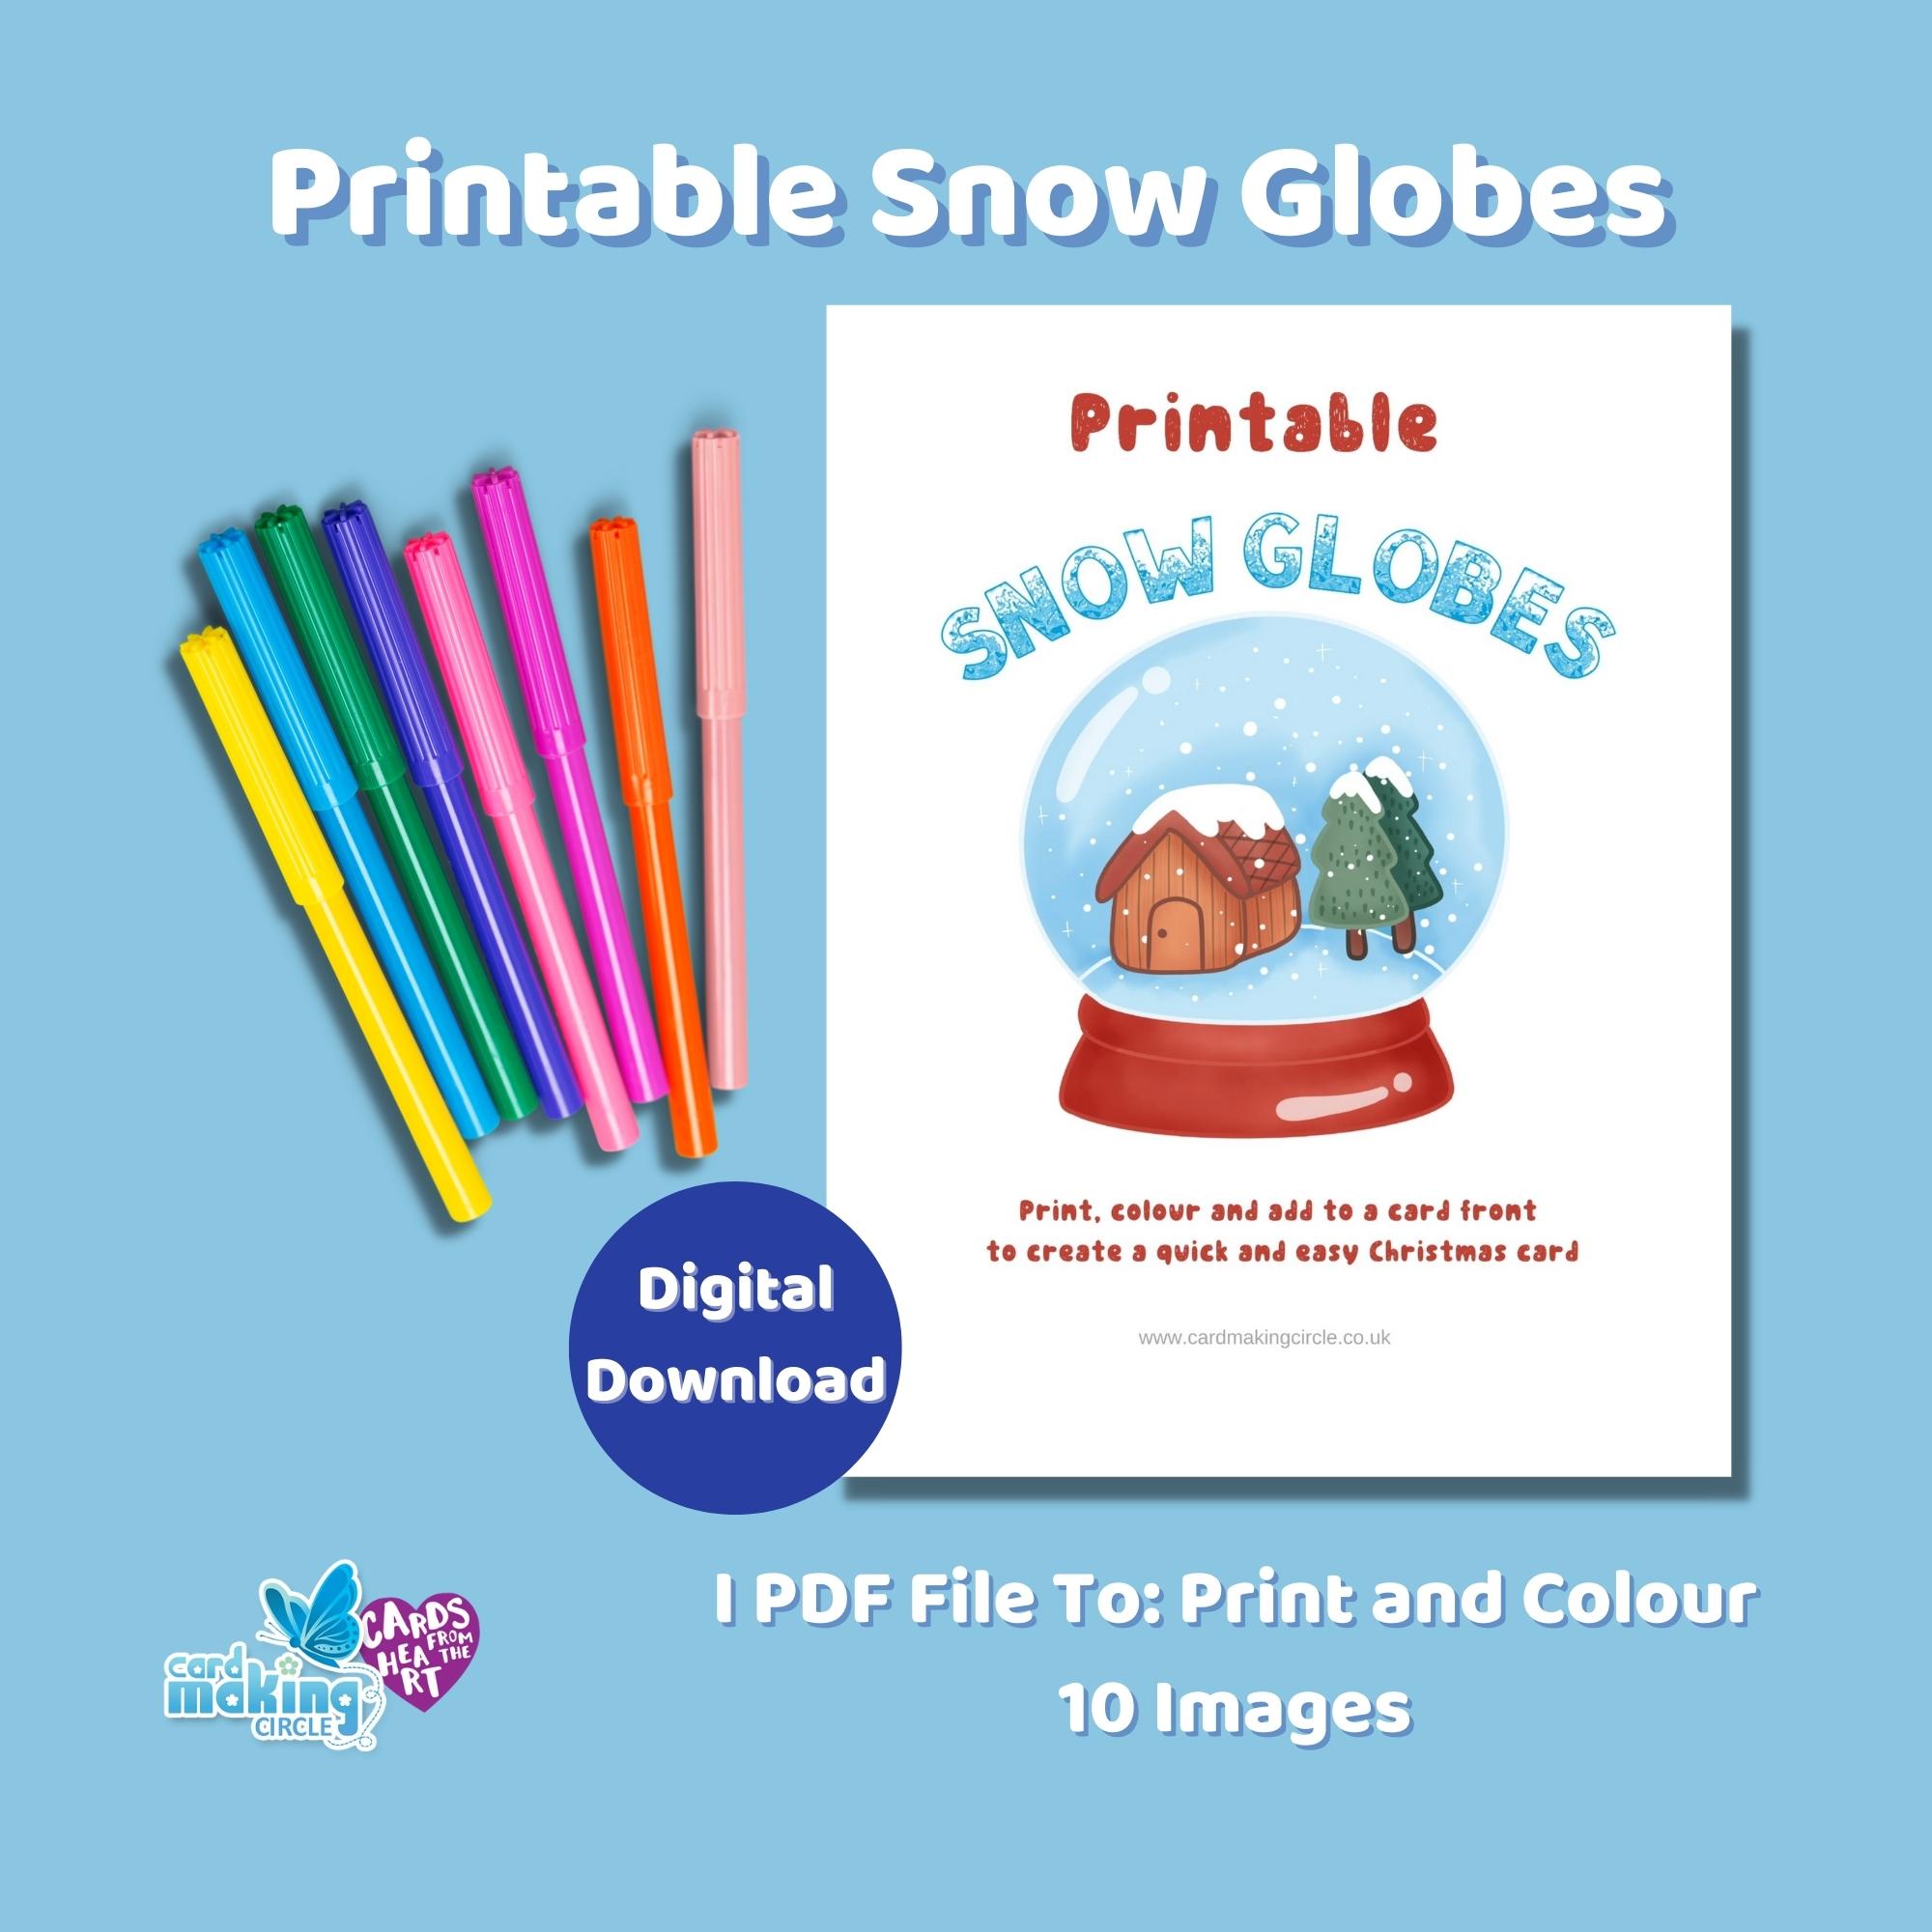 Ten printable snow globes to print, colour and use to create your own handmade Christmas cards.